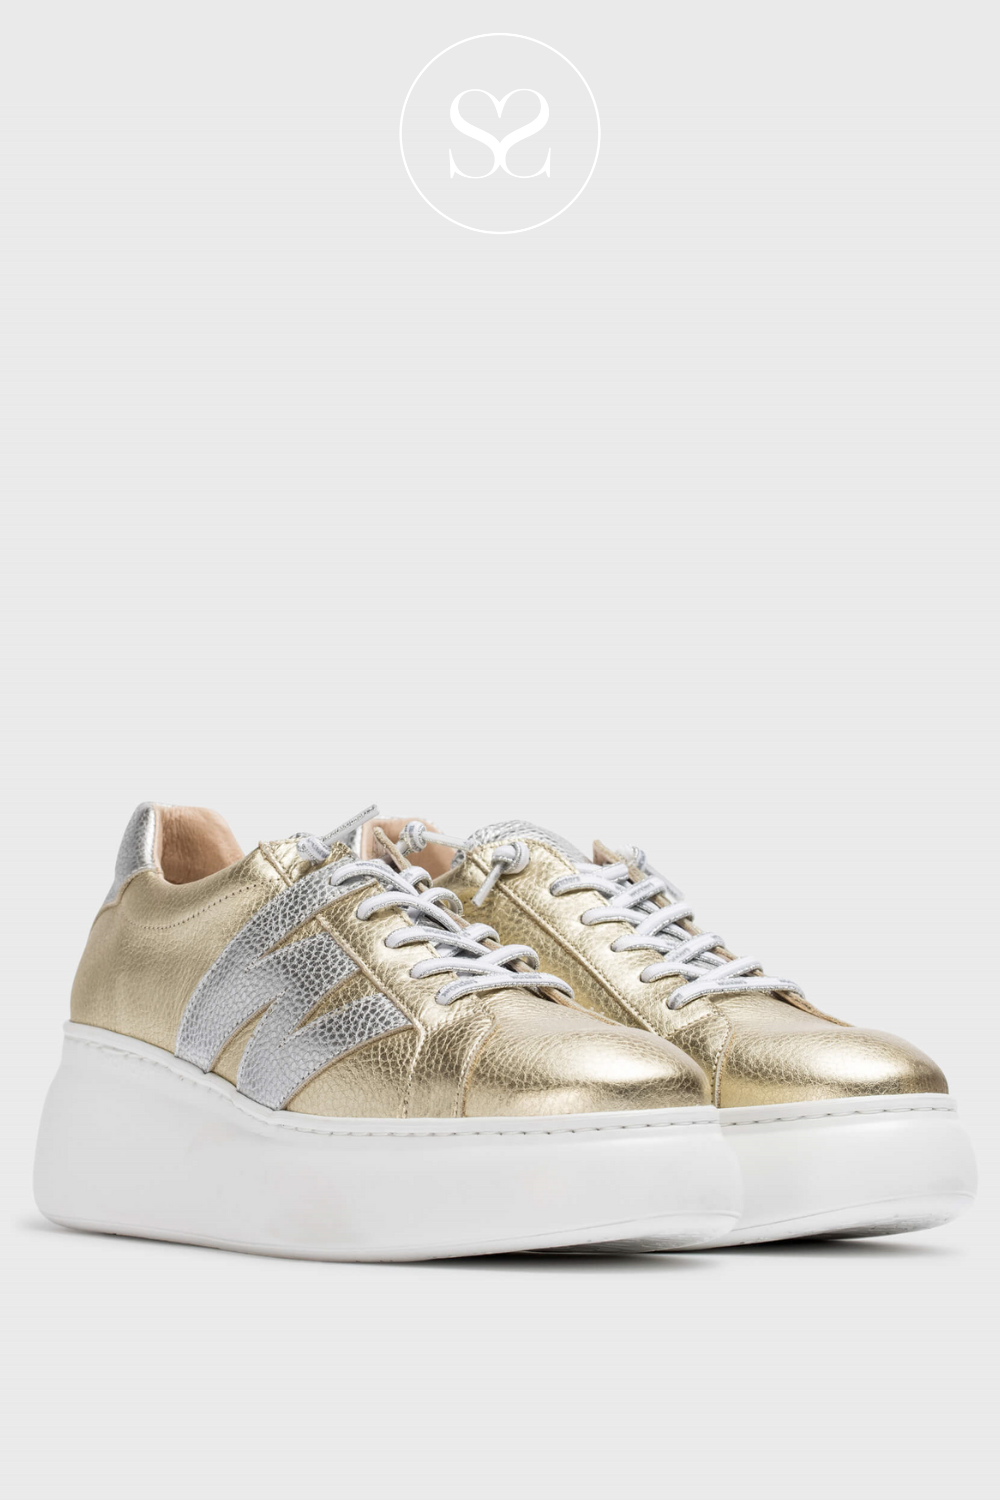 WONDERS A-2650 GOLD LEATHER FLATFORM TRAINERS WITH SILVER WONDERS BRANDING ON THE SIDE AND A WHITE SOLE